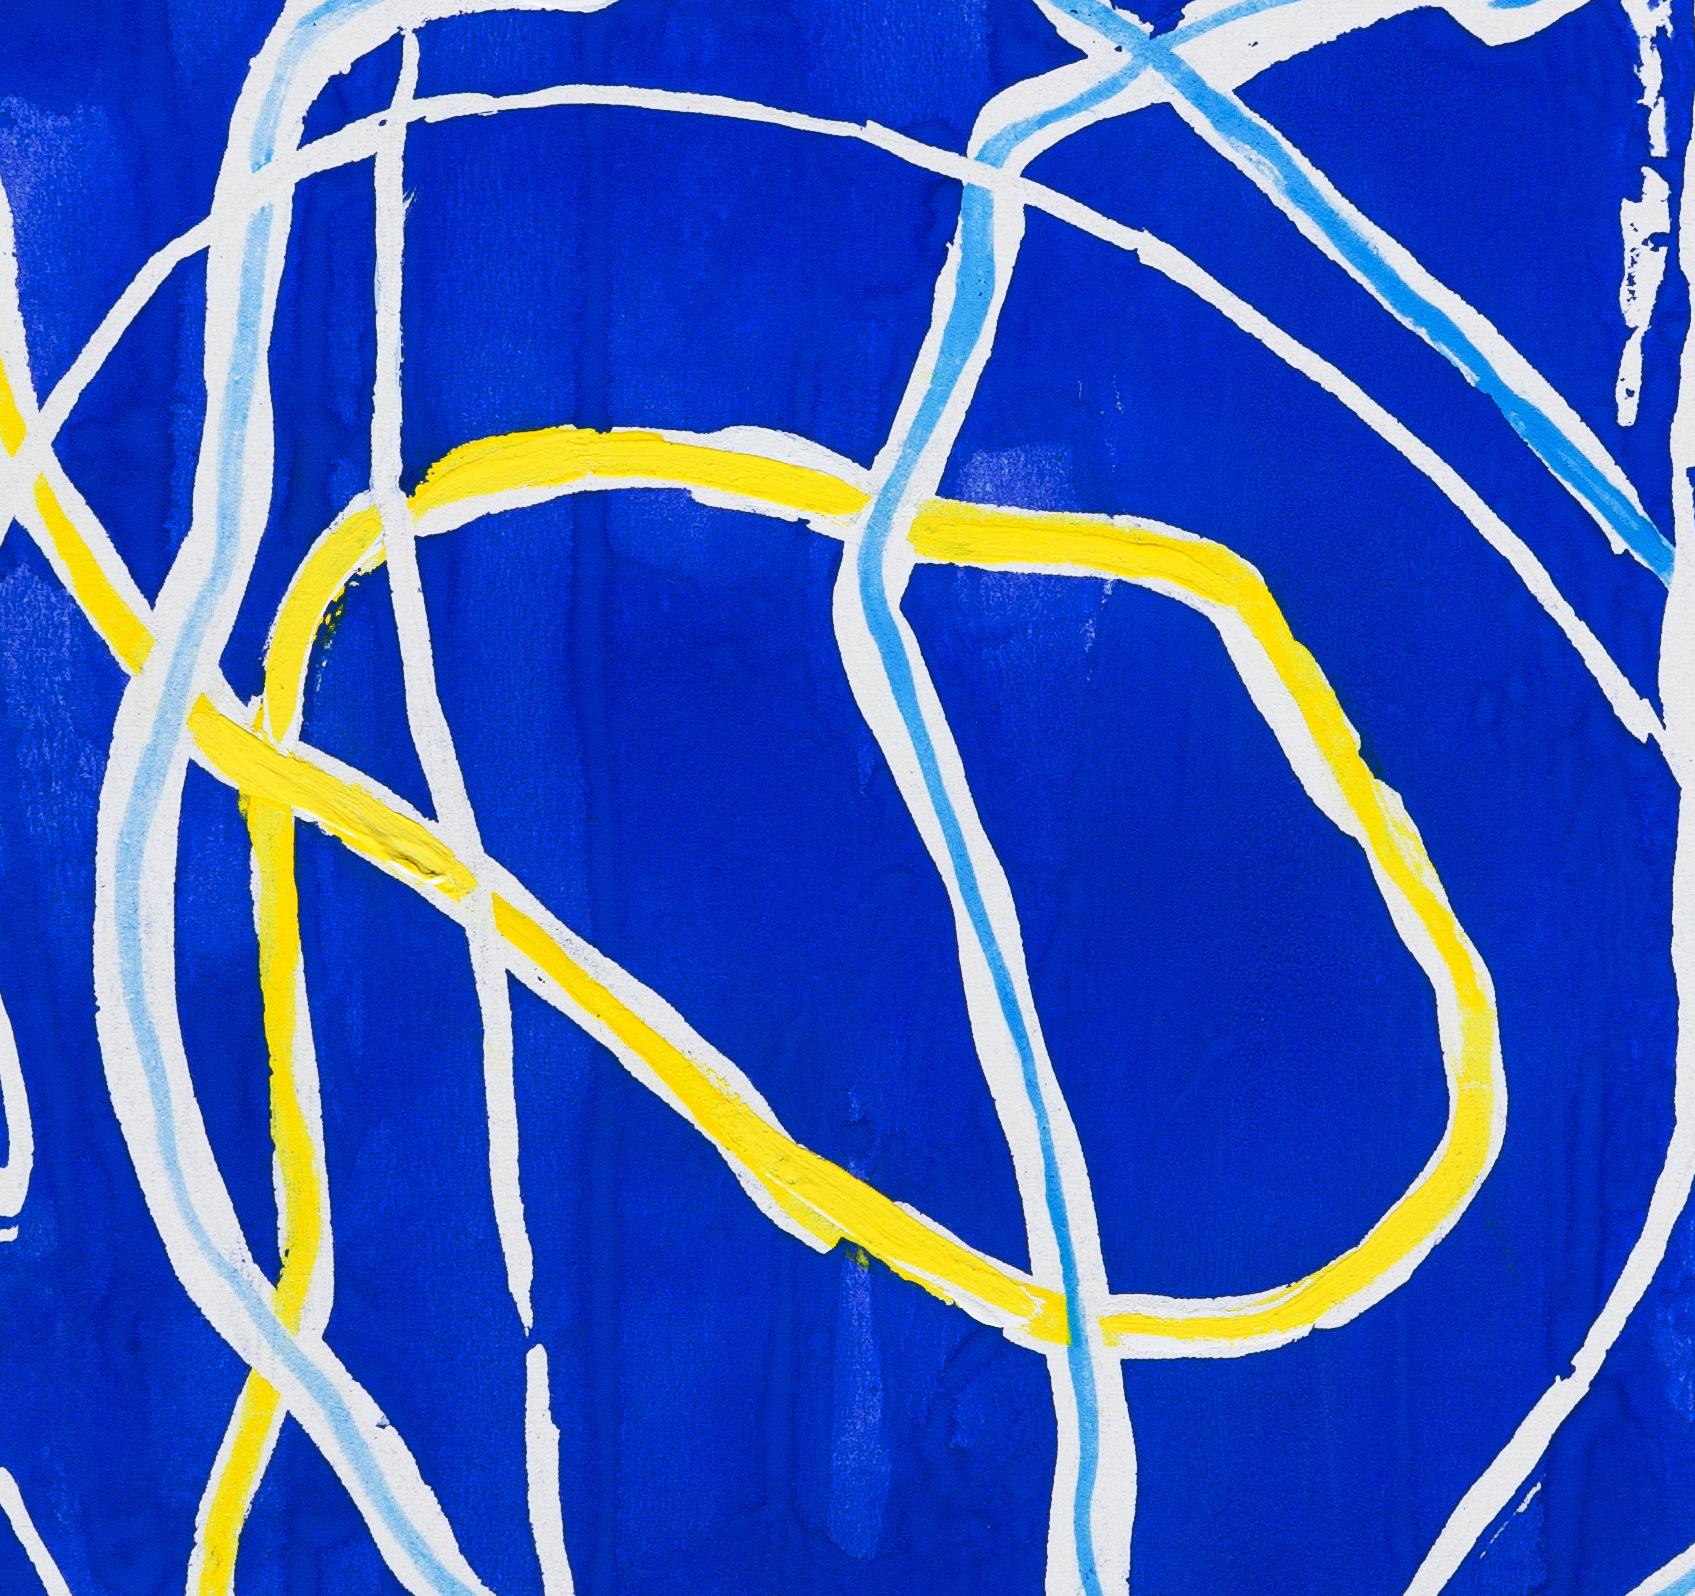 Inlet -- contemporary abstract gestural painting on blue w/ yellow & white lines - Painting by Paula Cahill